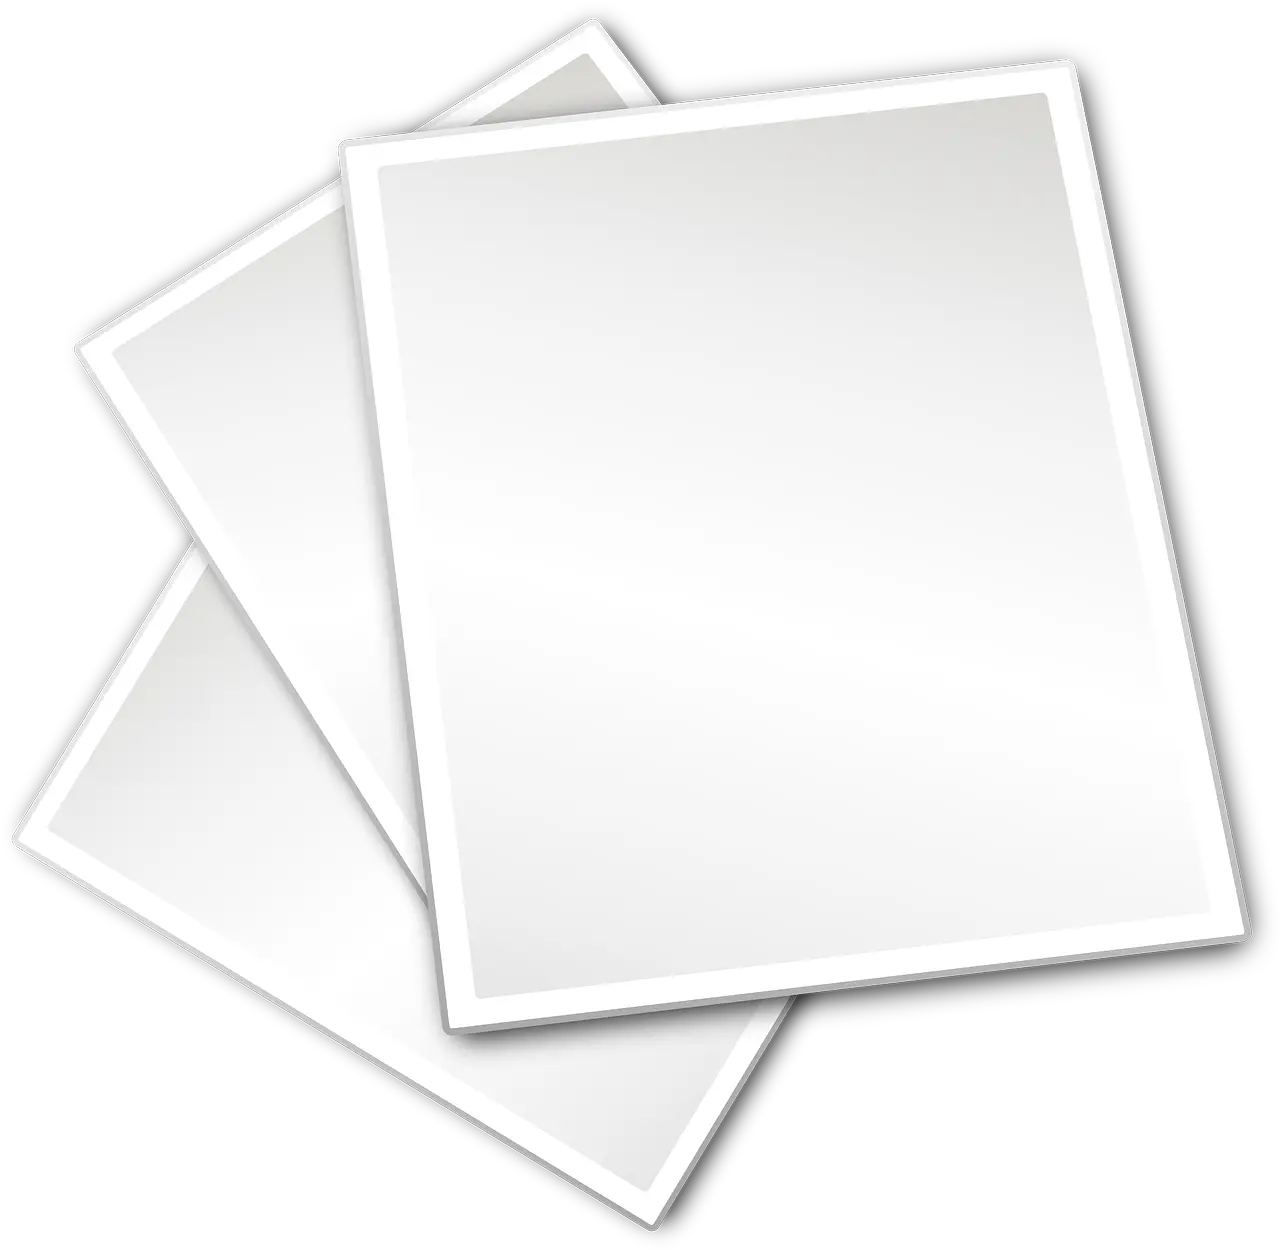 Three Paper White Free Vector Graphic On Pixabay 10 Years Of One Direction Envelope Png Clear Png